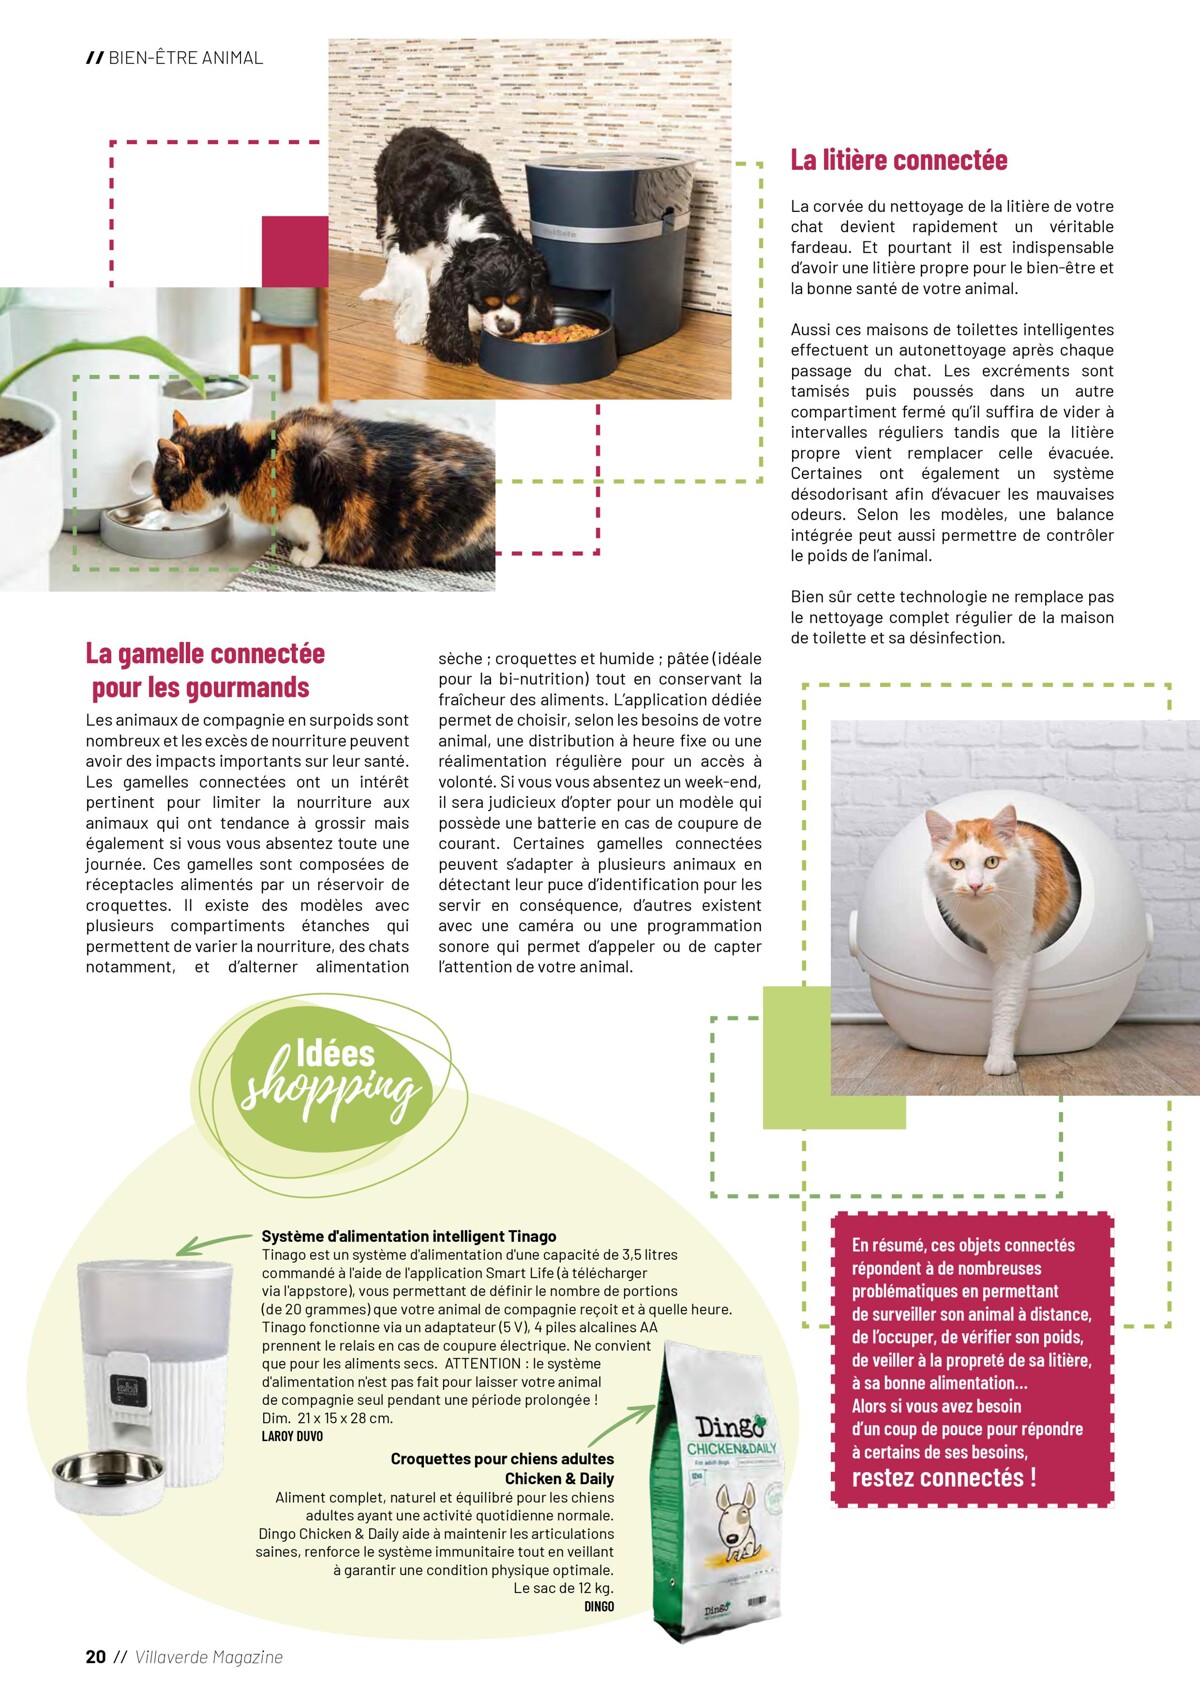 Catalogue Mag n°46 Animalerie, page 00020